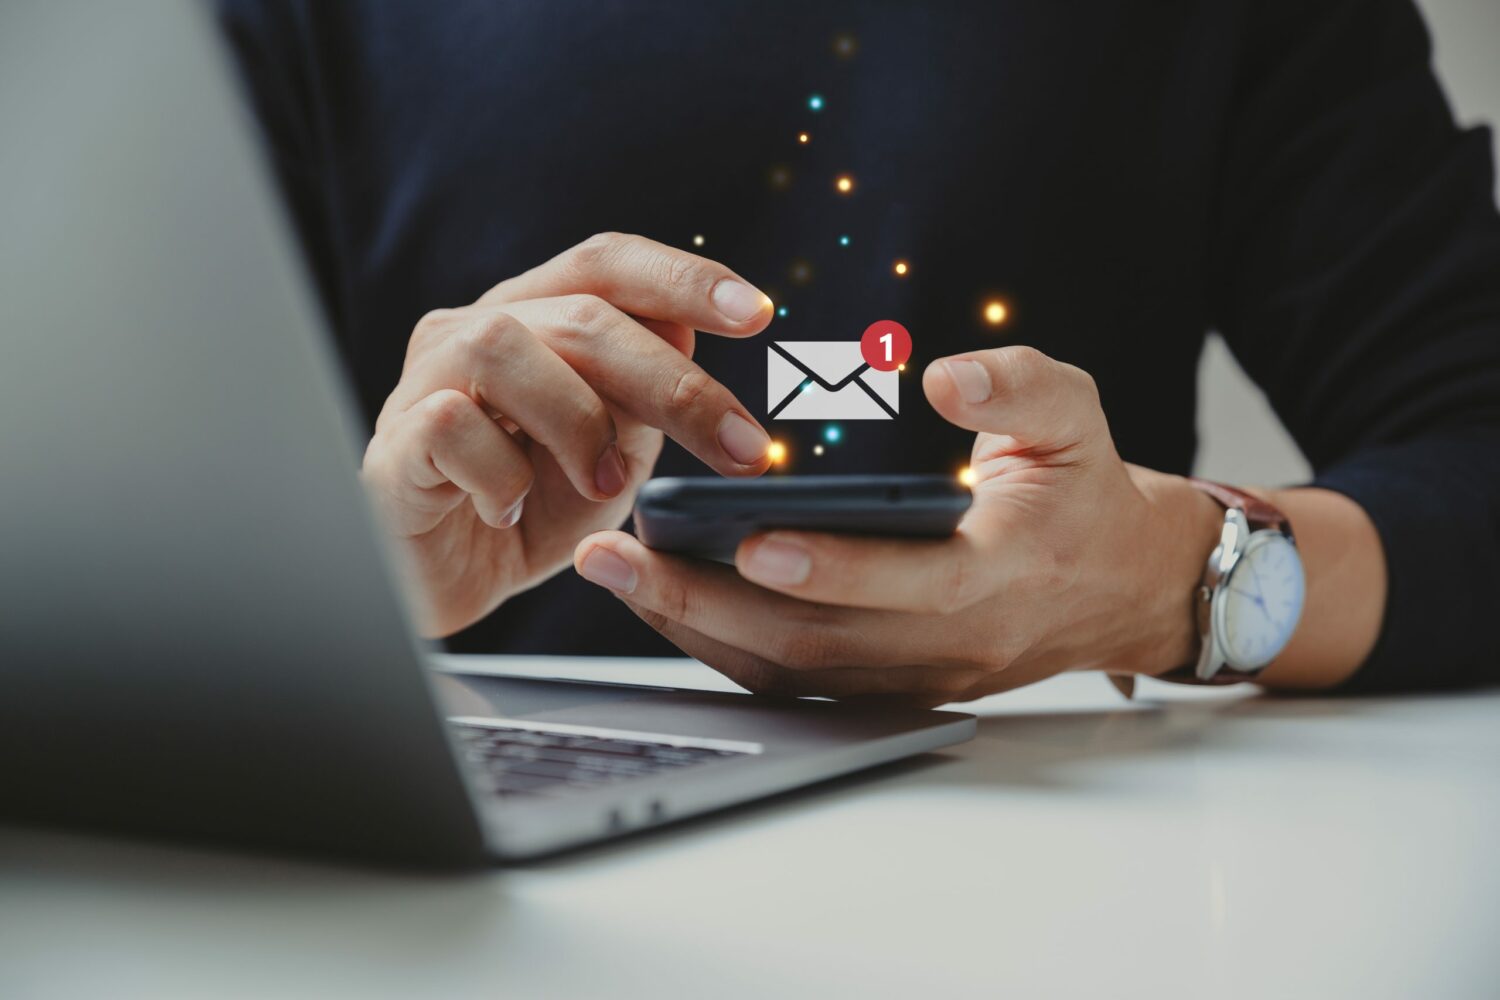 By incorporating these nine trends into their email marketing strategies, dealerships can effectively engage customers and drive sales.